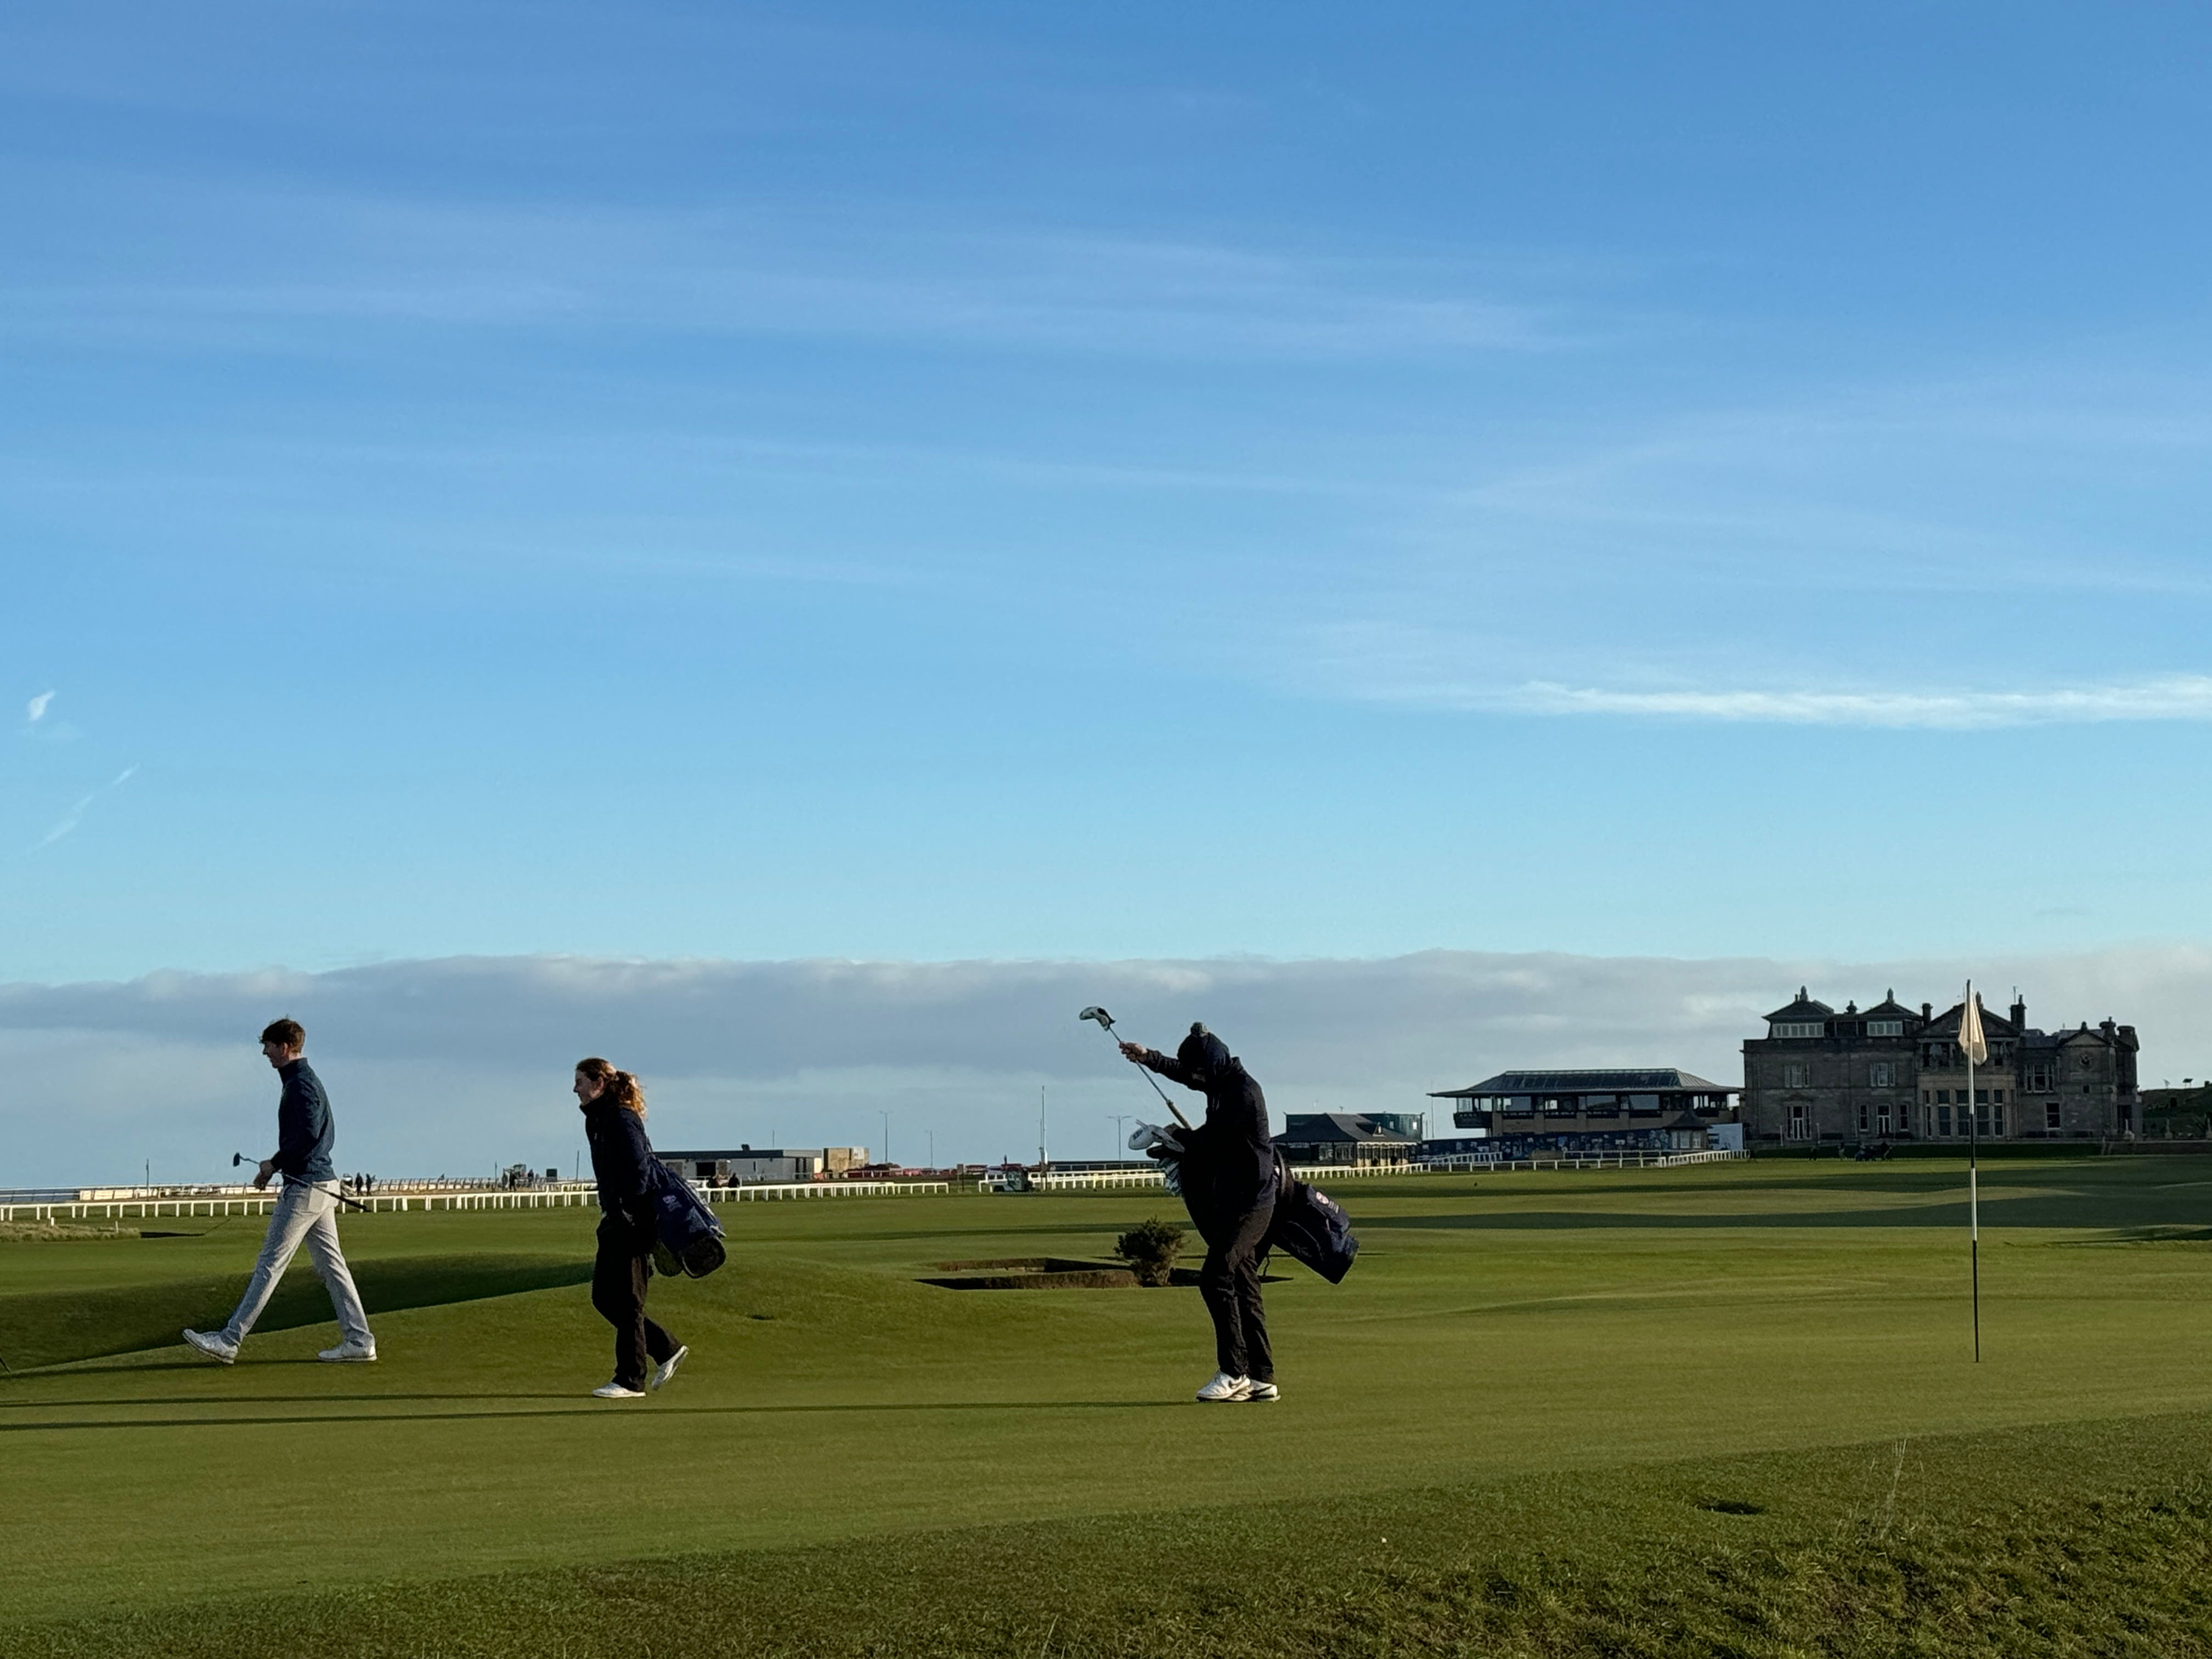 Where golf began: it’s hard to pass up the opportunity for a few holes on the Old Course